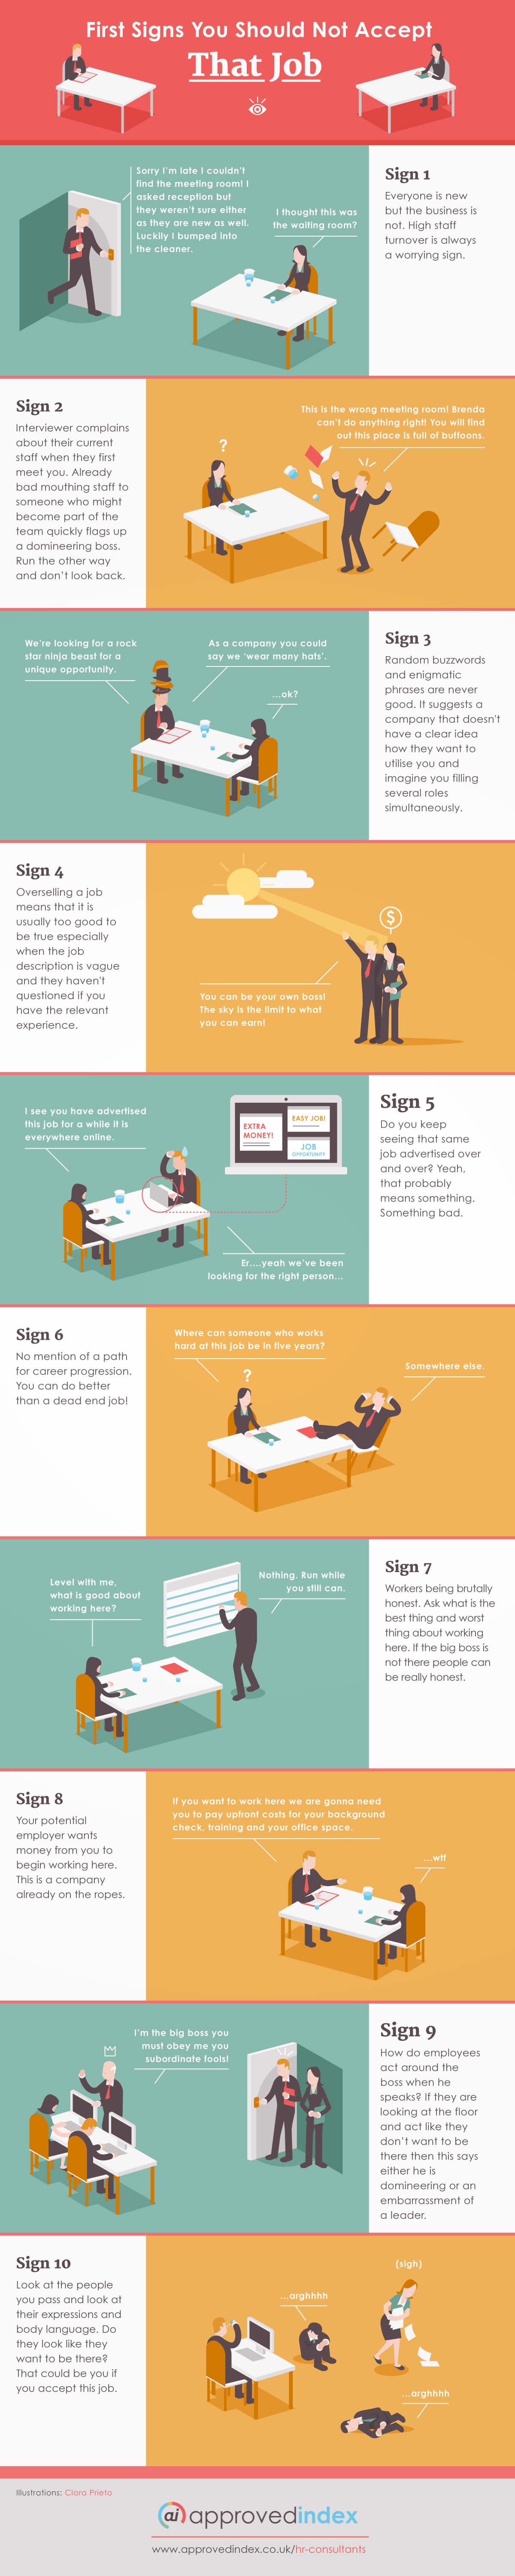 10 Signs You Should Not Accept That Job [Infographic]